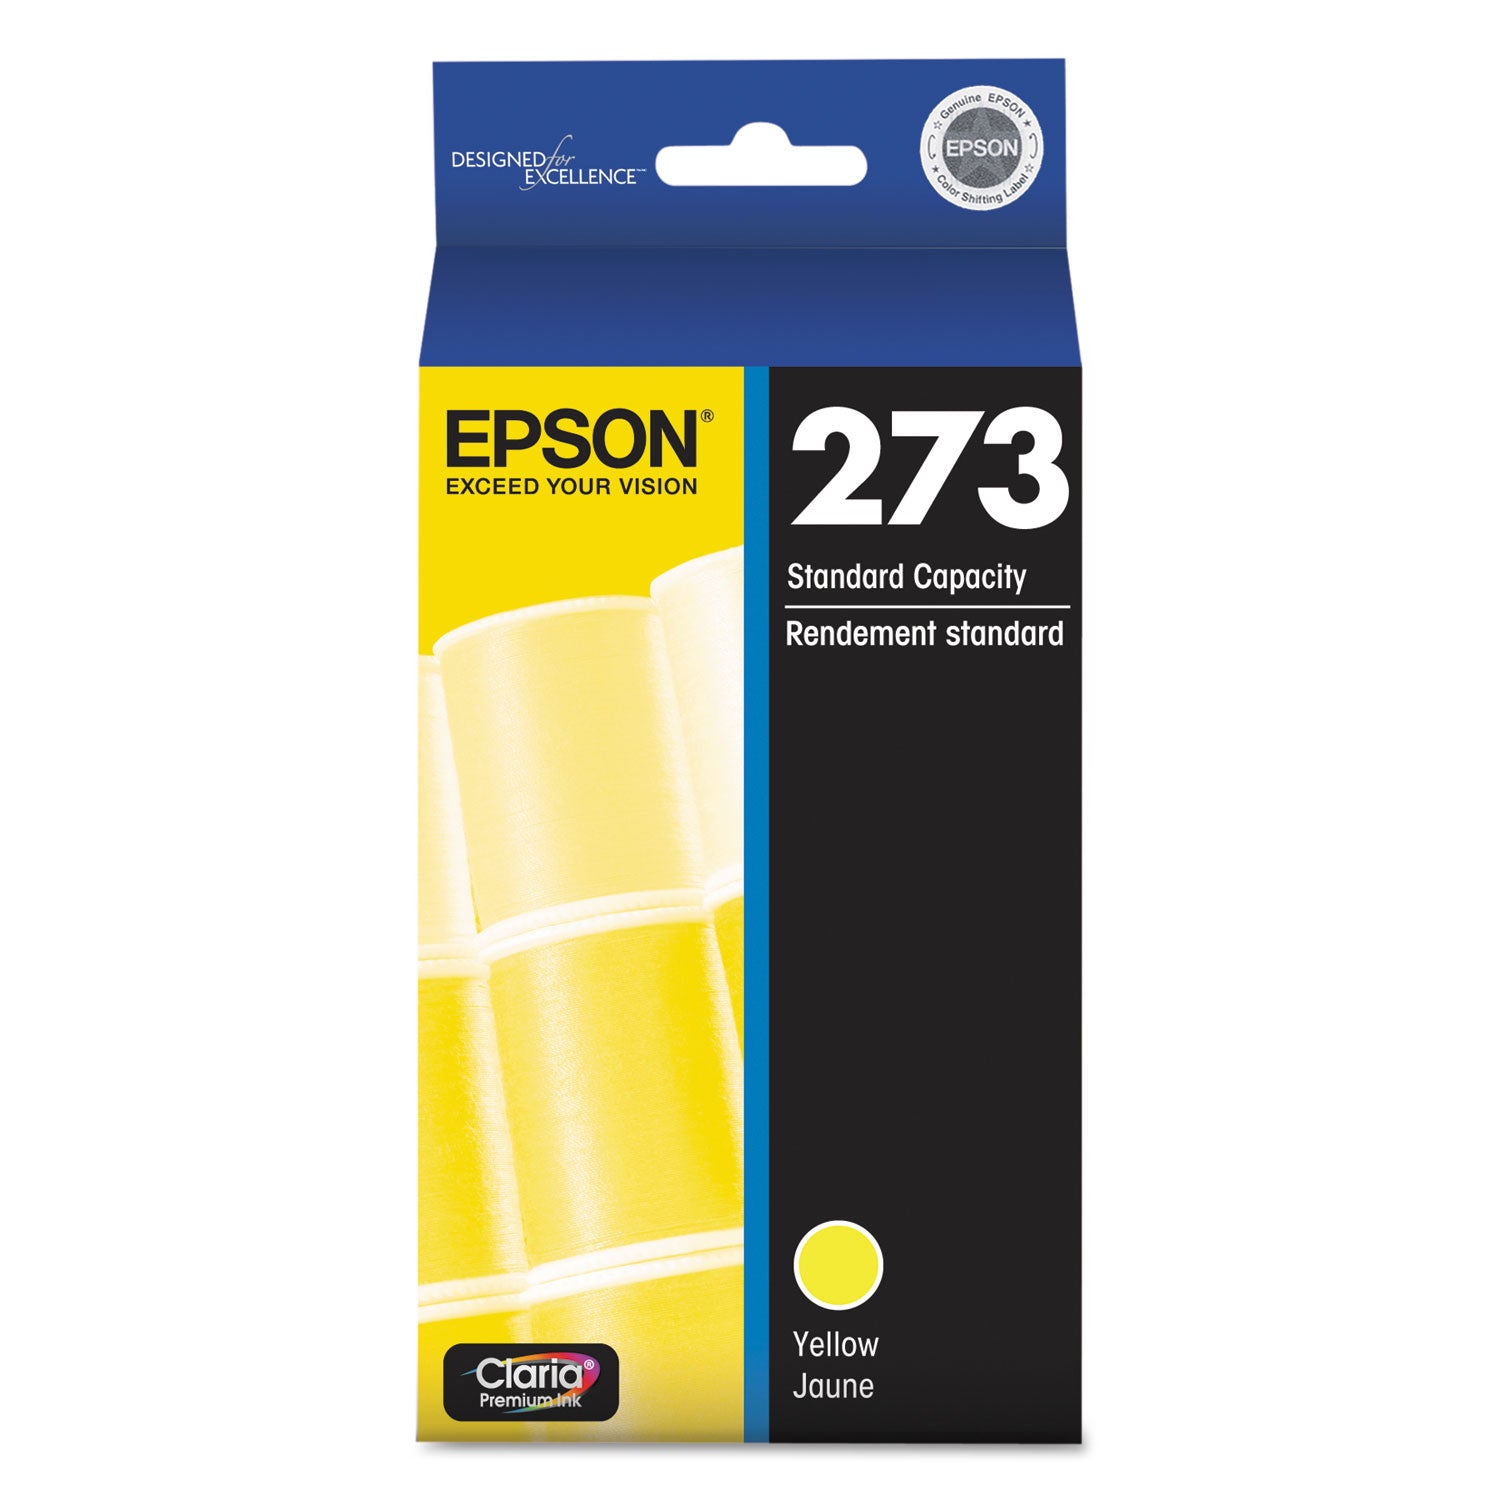 t273420-s-273-claria-ink-300-page-yield-yellow_epst273420s - 1